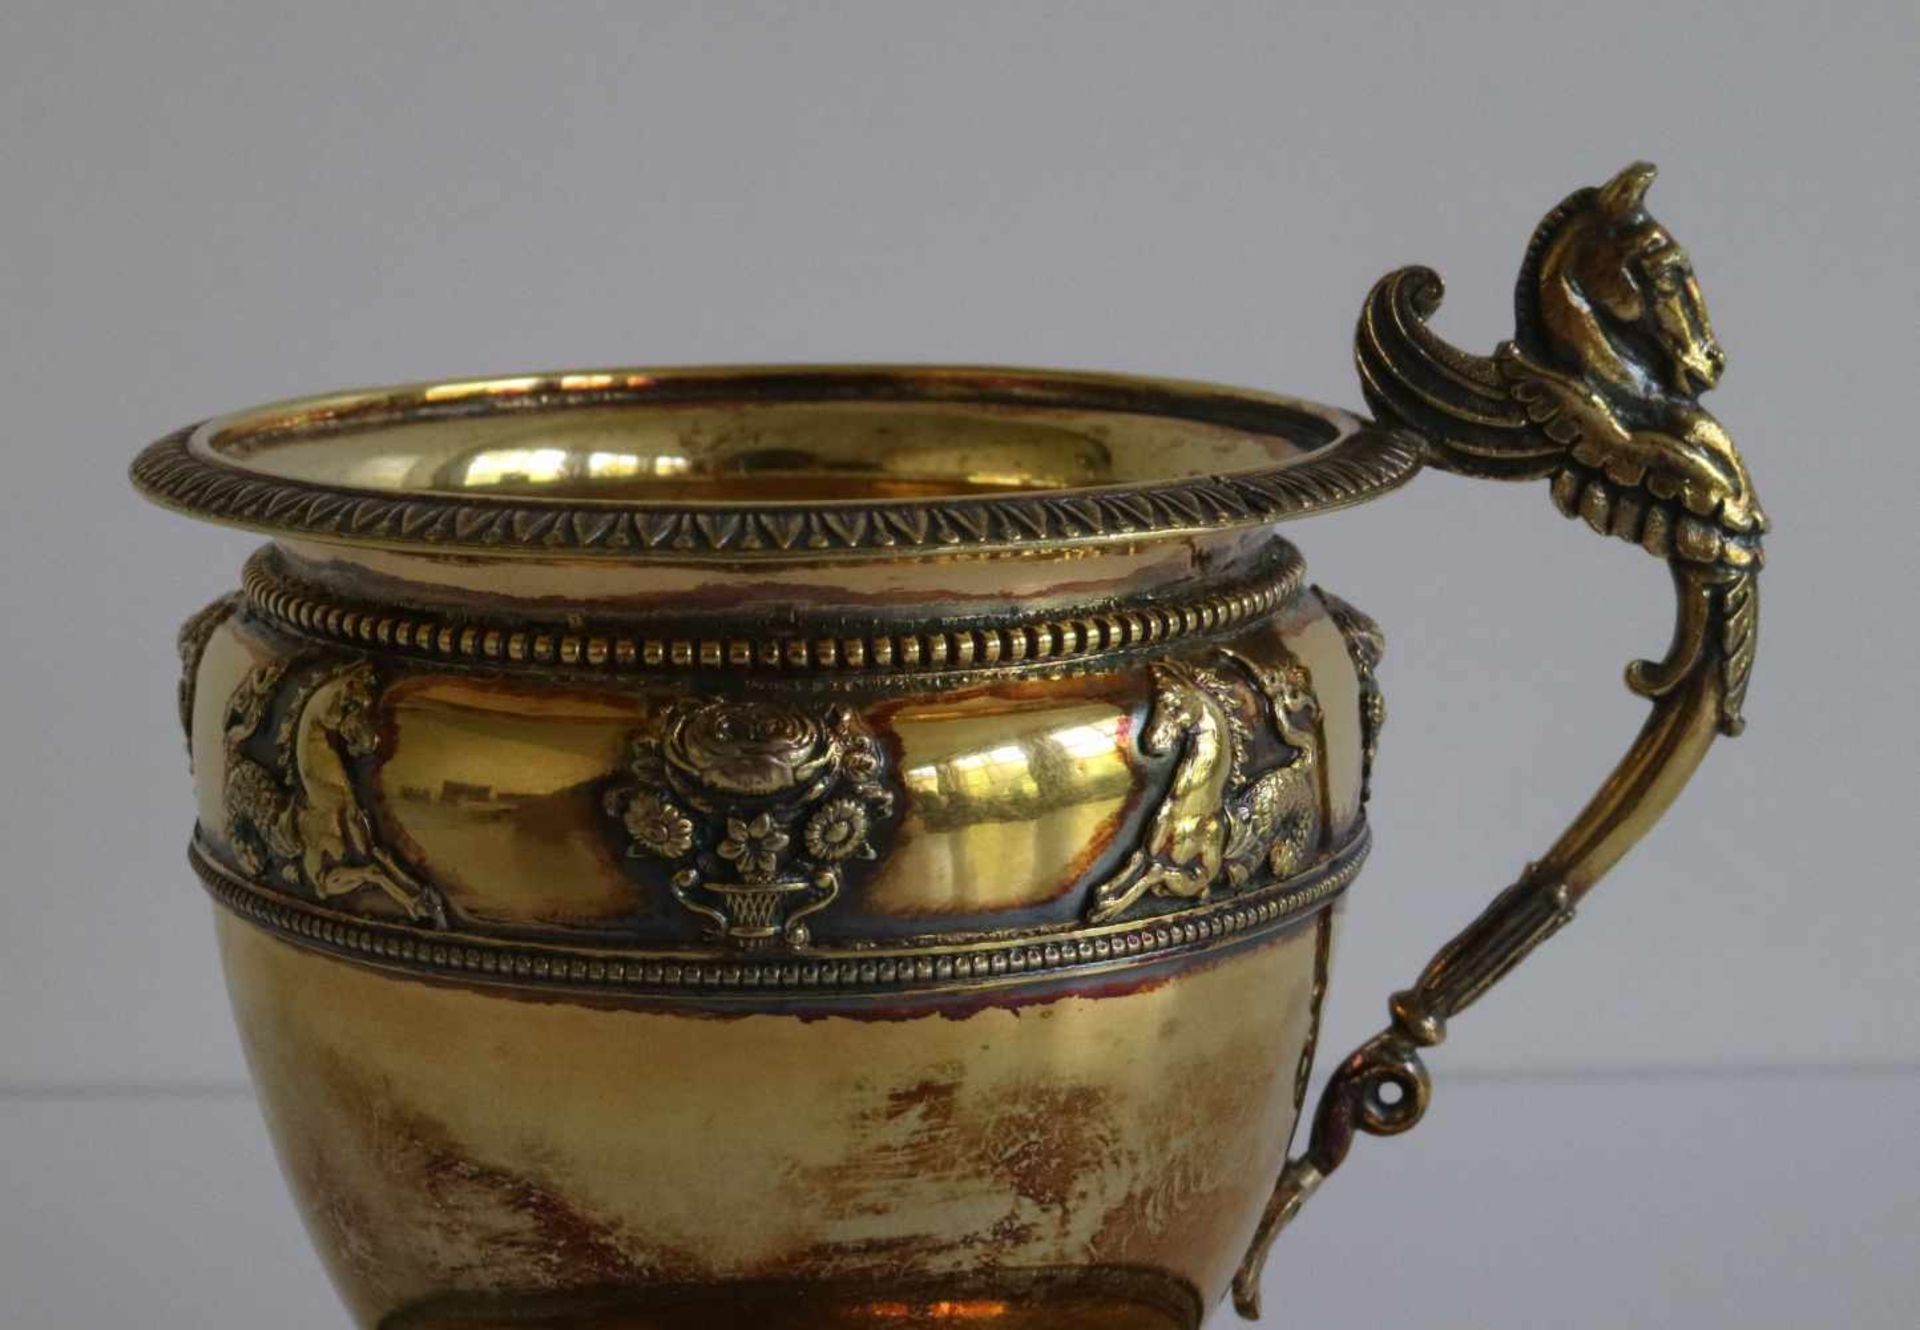 Chocolate cup with saucer silver with vermeille, Paris 1818 - 1838, 293 grams H 12 dia 13,5 cm - Image 2 of 6